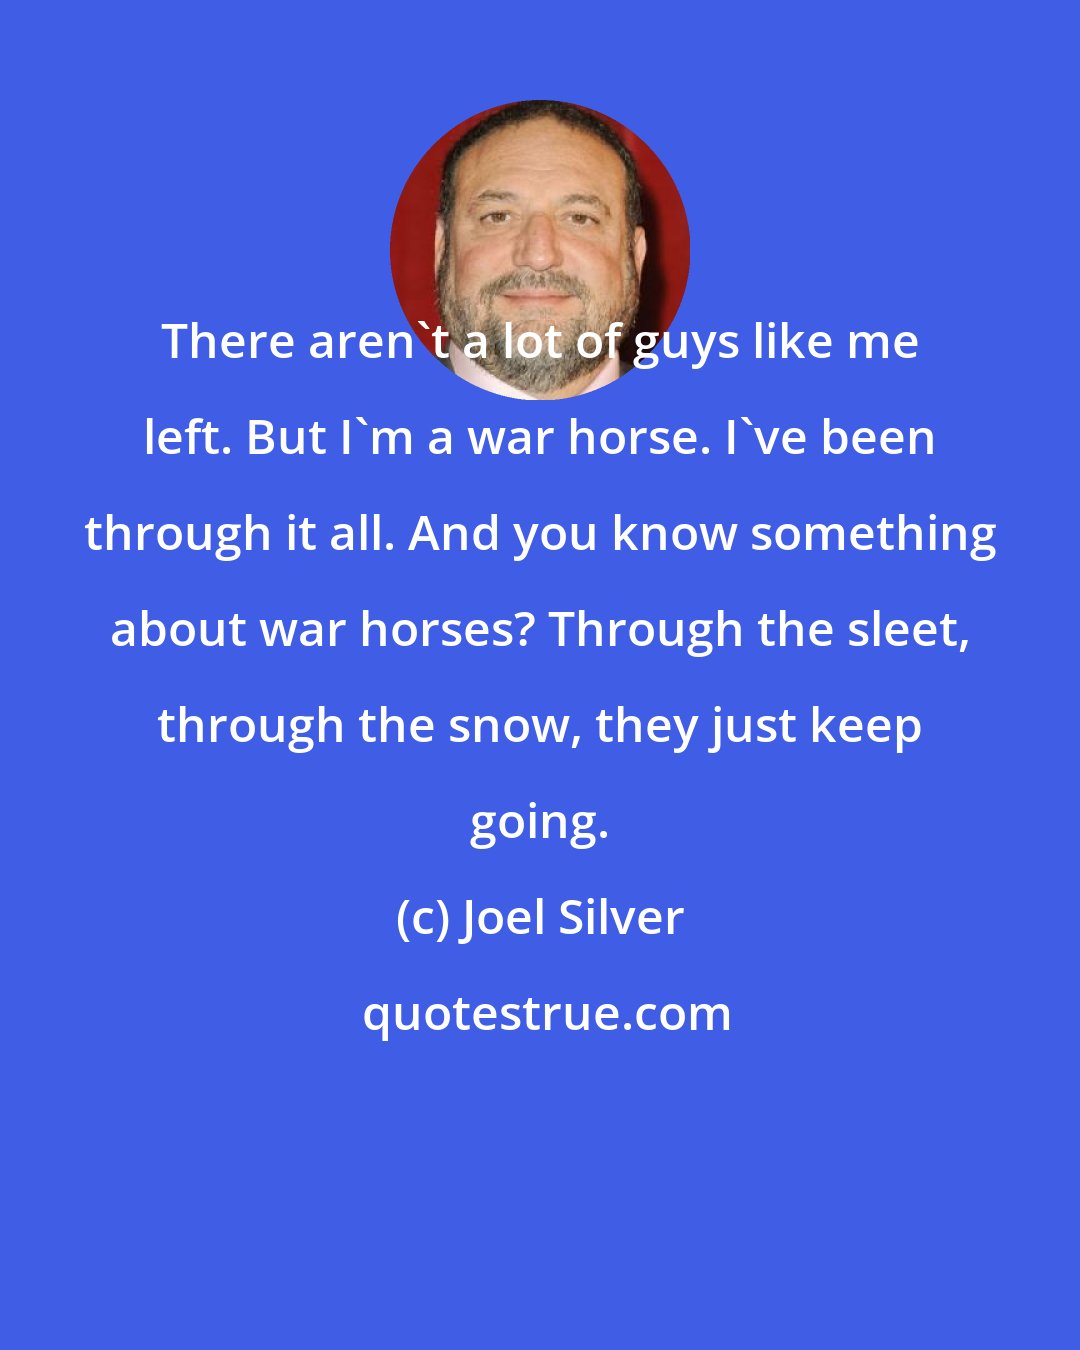 Joel Silver: There aren't a lot of guys like me left. But I'm a war horse. I've been through it all. And you know something about war horses? Through the sleet, through the snow, they just keep going.